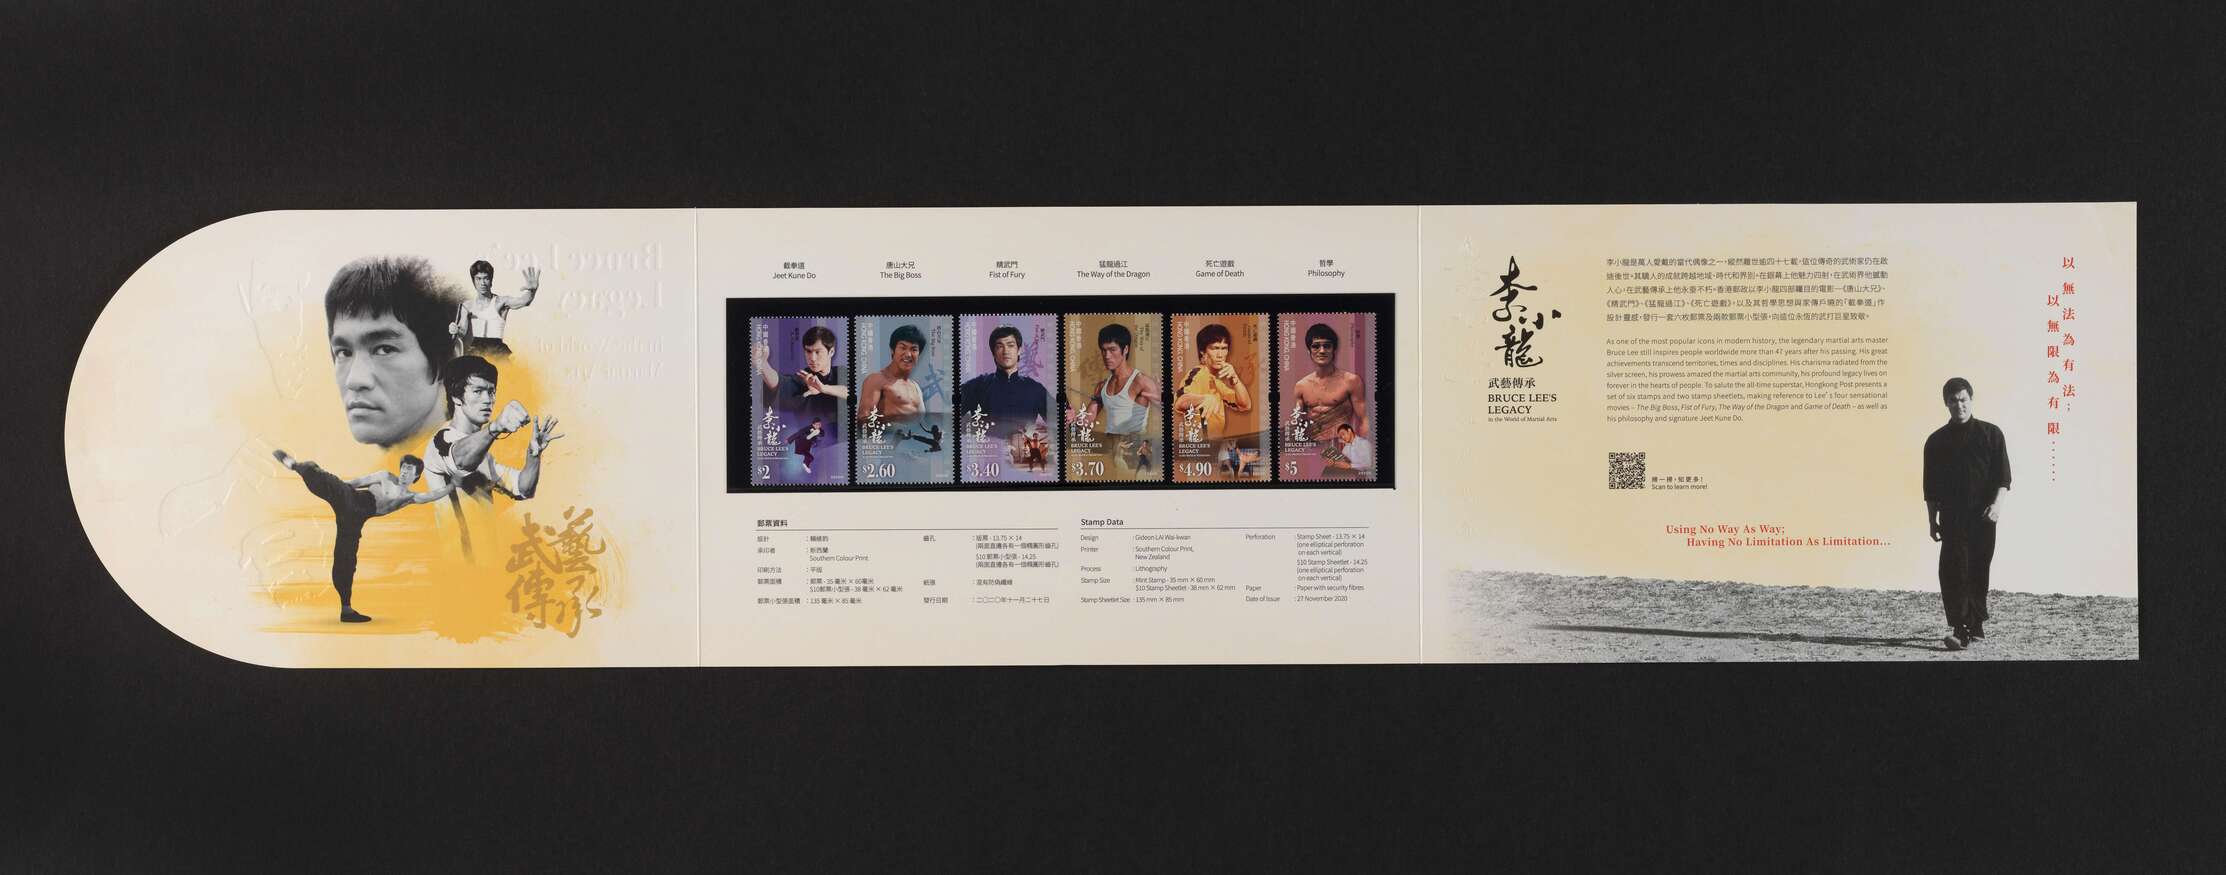 "Bruce Lee's Legacy in the World of Martial Arts" presentation pack